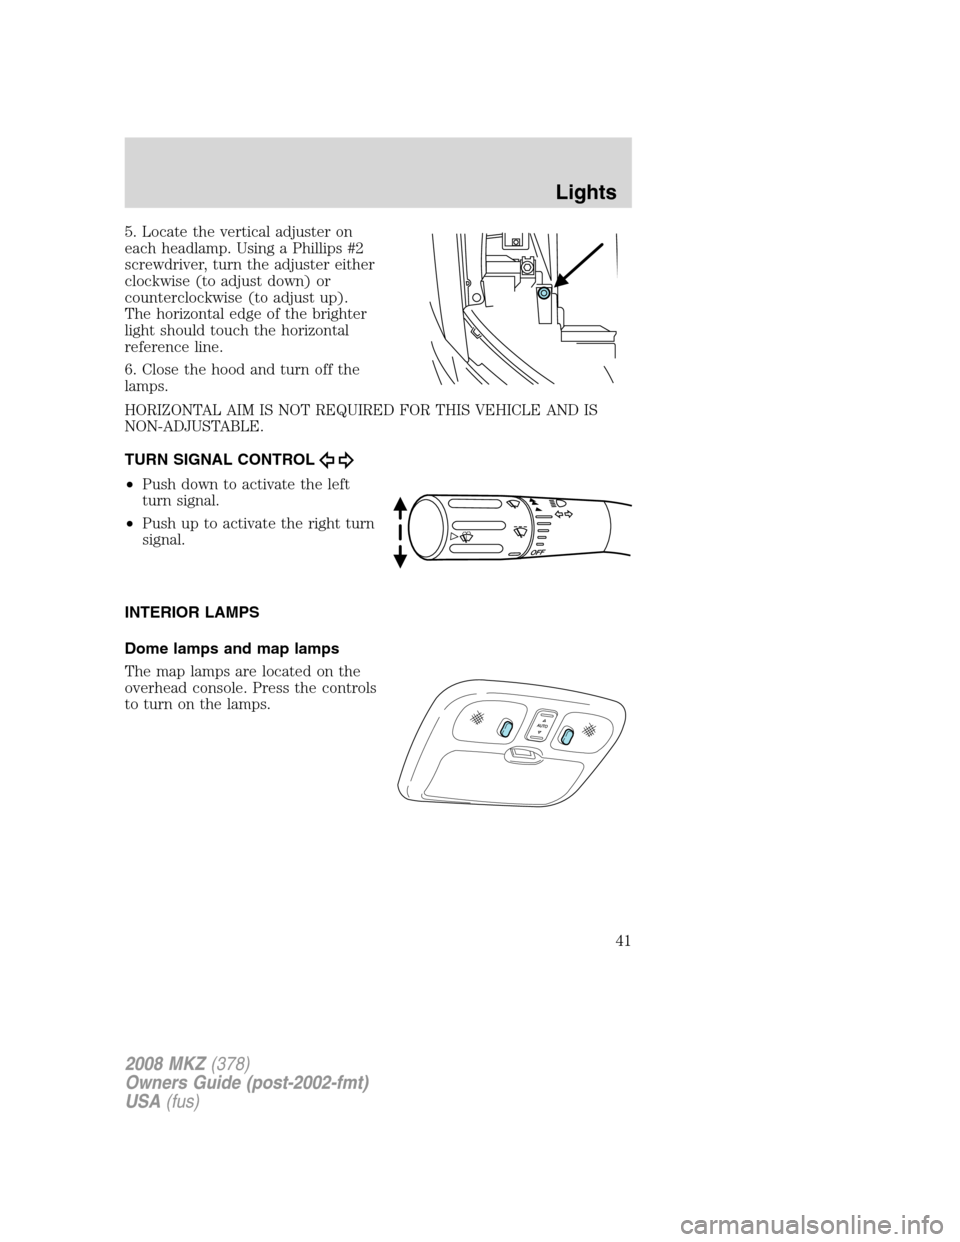 LINCOLN MKZ 2008 Service Manual 5. Locate the vertical adjuster on
each headlamp. Using a Phillips #2
screwdriver, turn the adjuster either
clockwise (to adjust down) or
counterclockwise (to adjust up).
The horizontal edge of the br